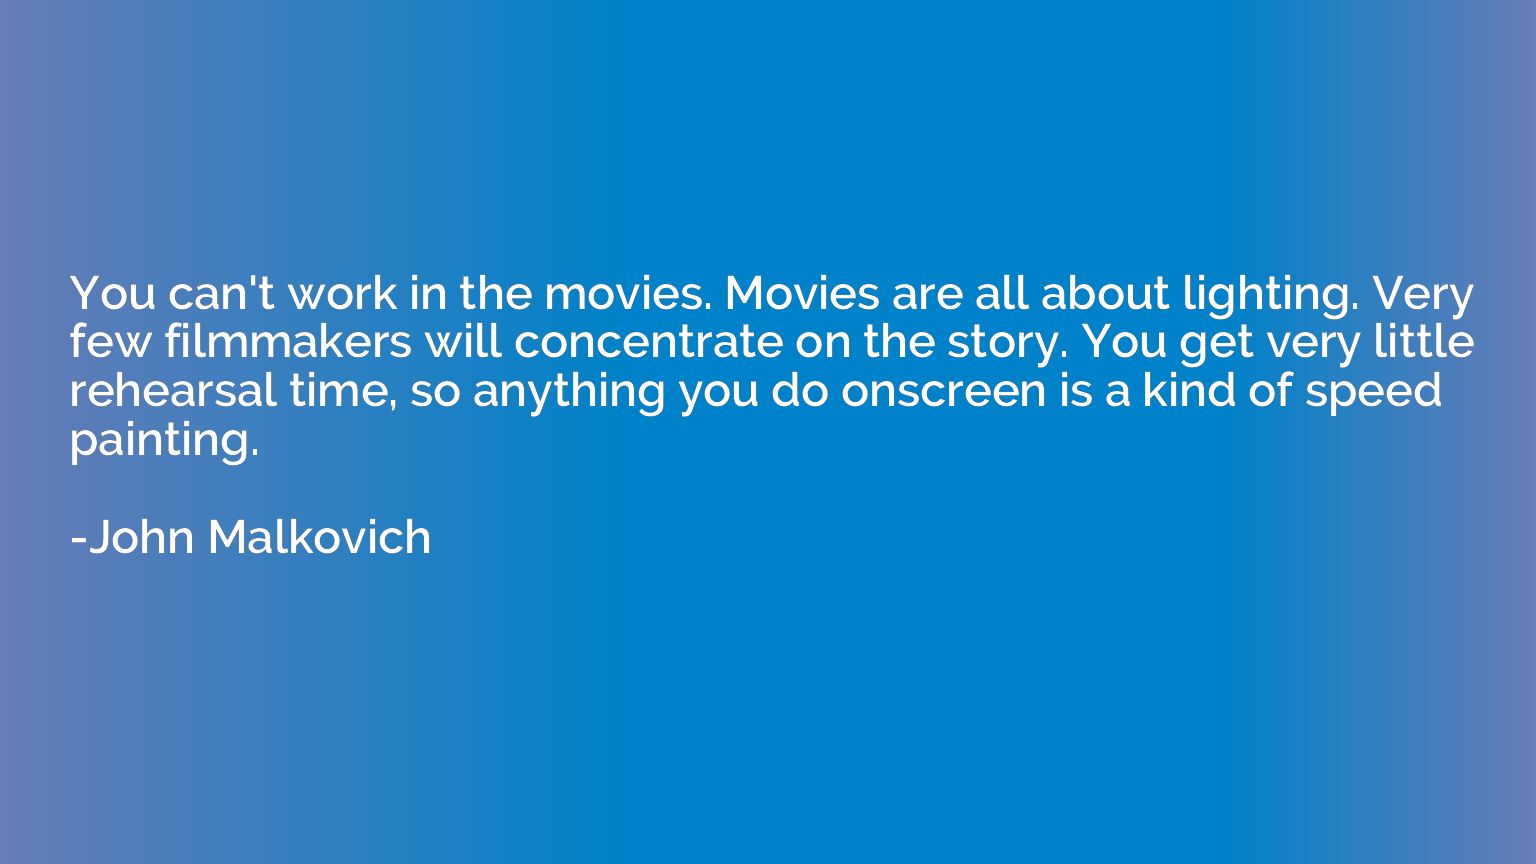 You can't work in the movies. Movies are all about lighting.